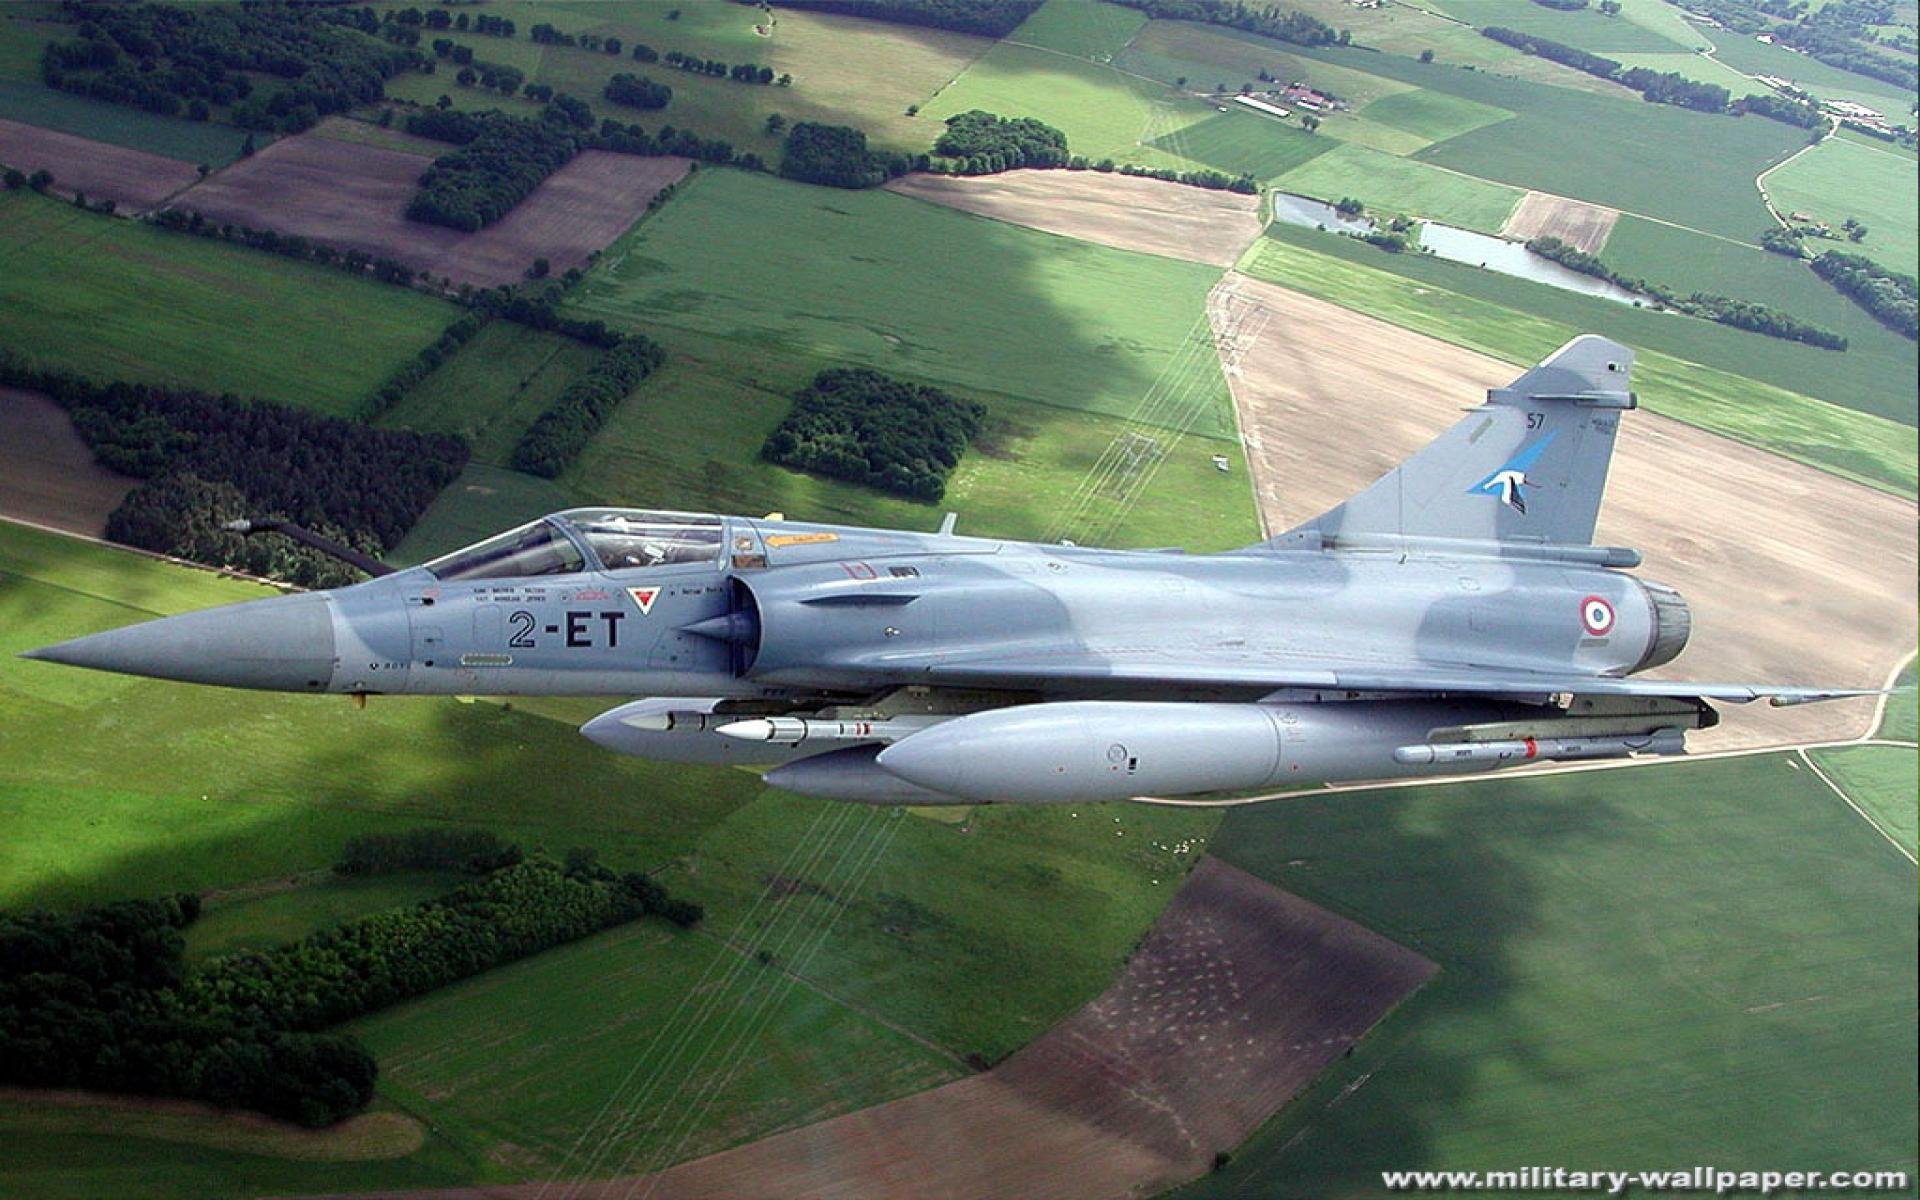 47 Dassault Mirage 2000 Hd Wallpapers Background Images Images, Photos, Reviews